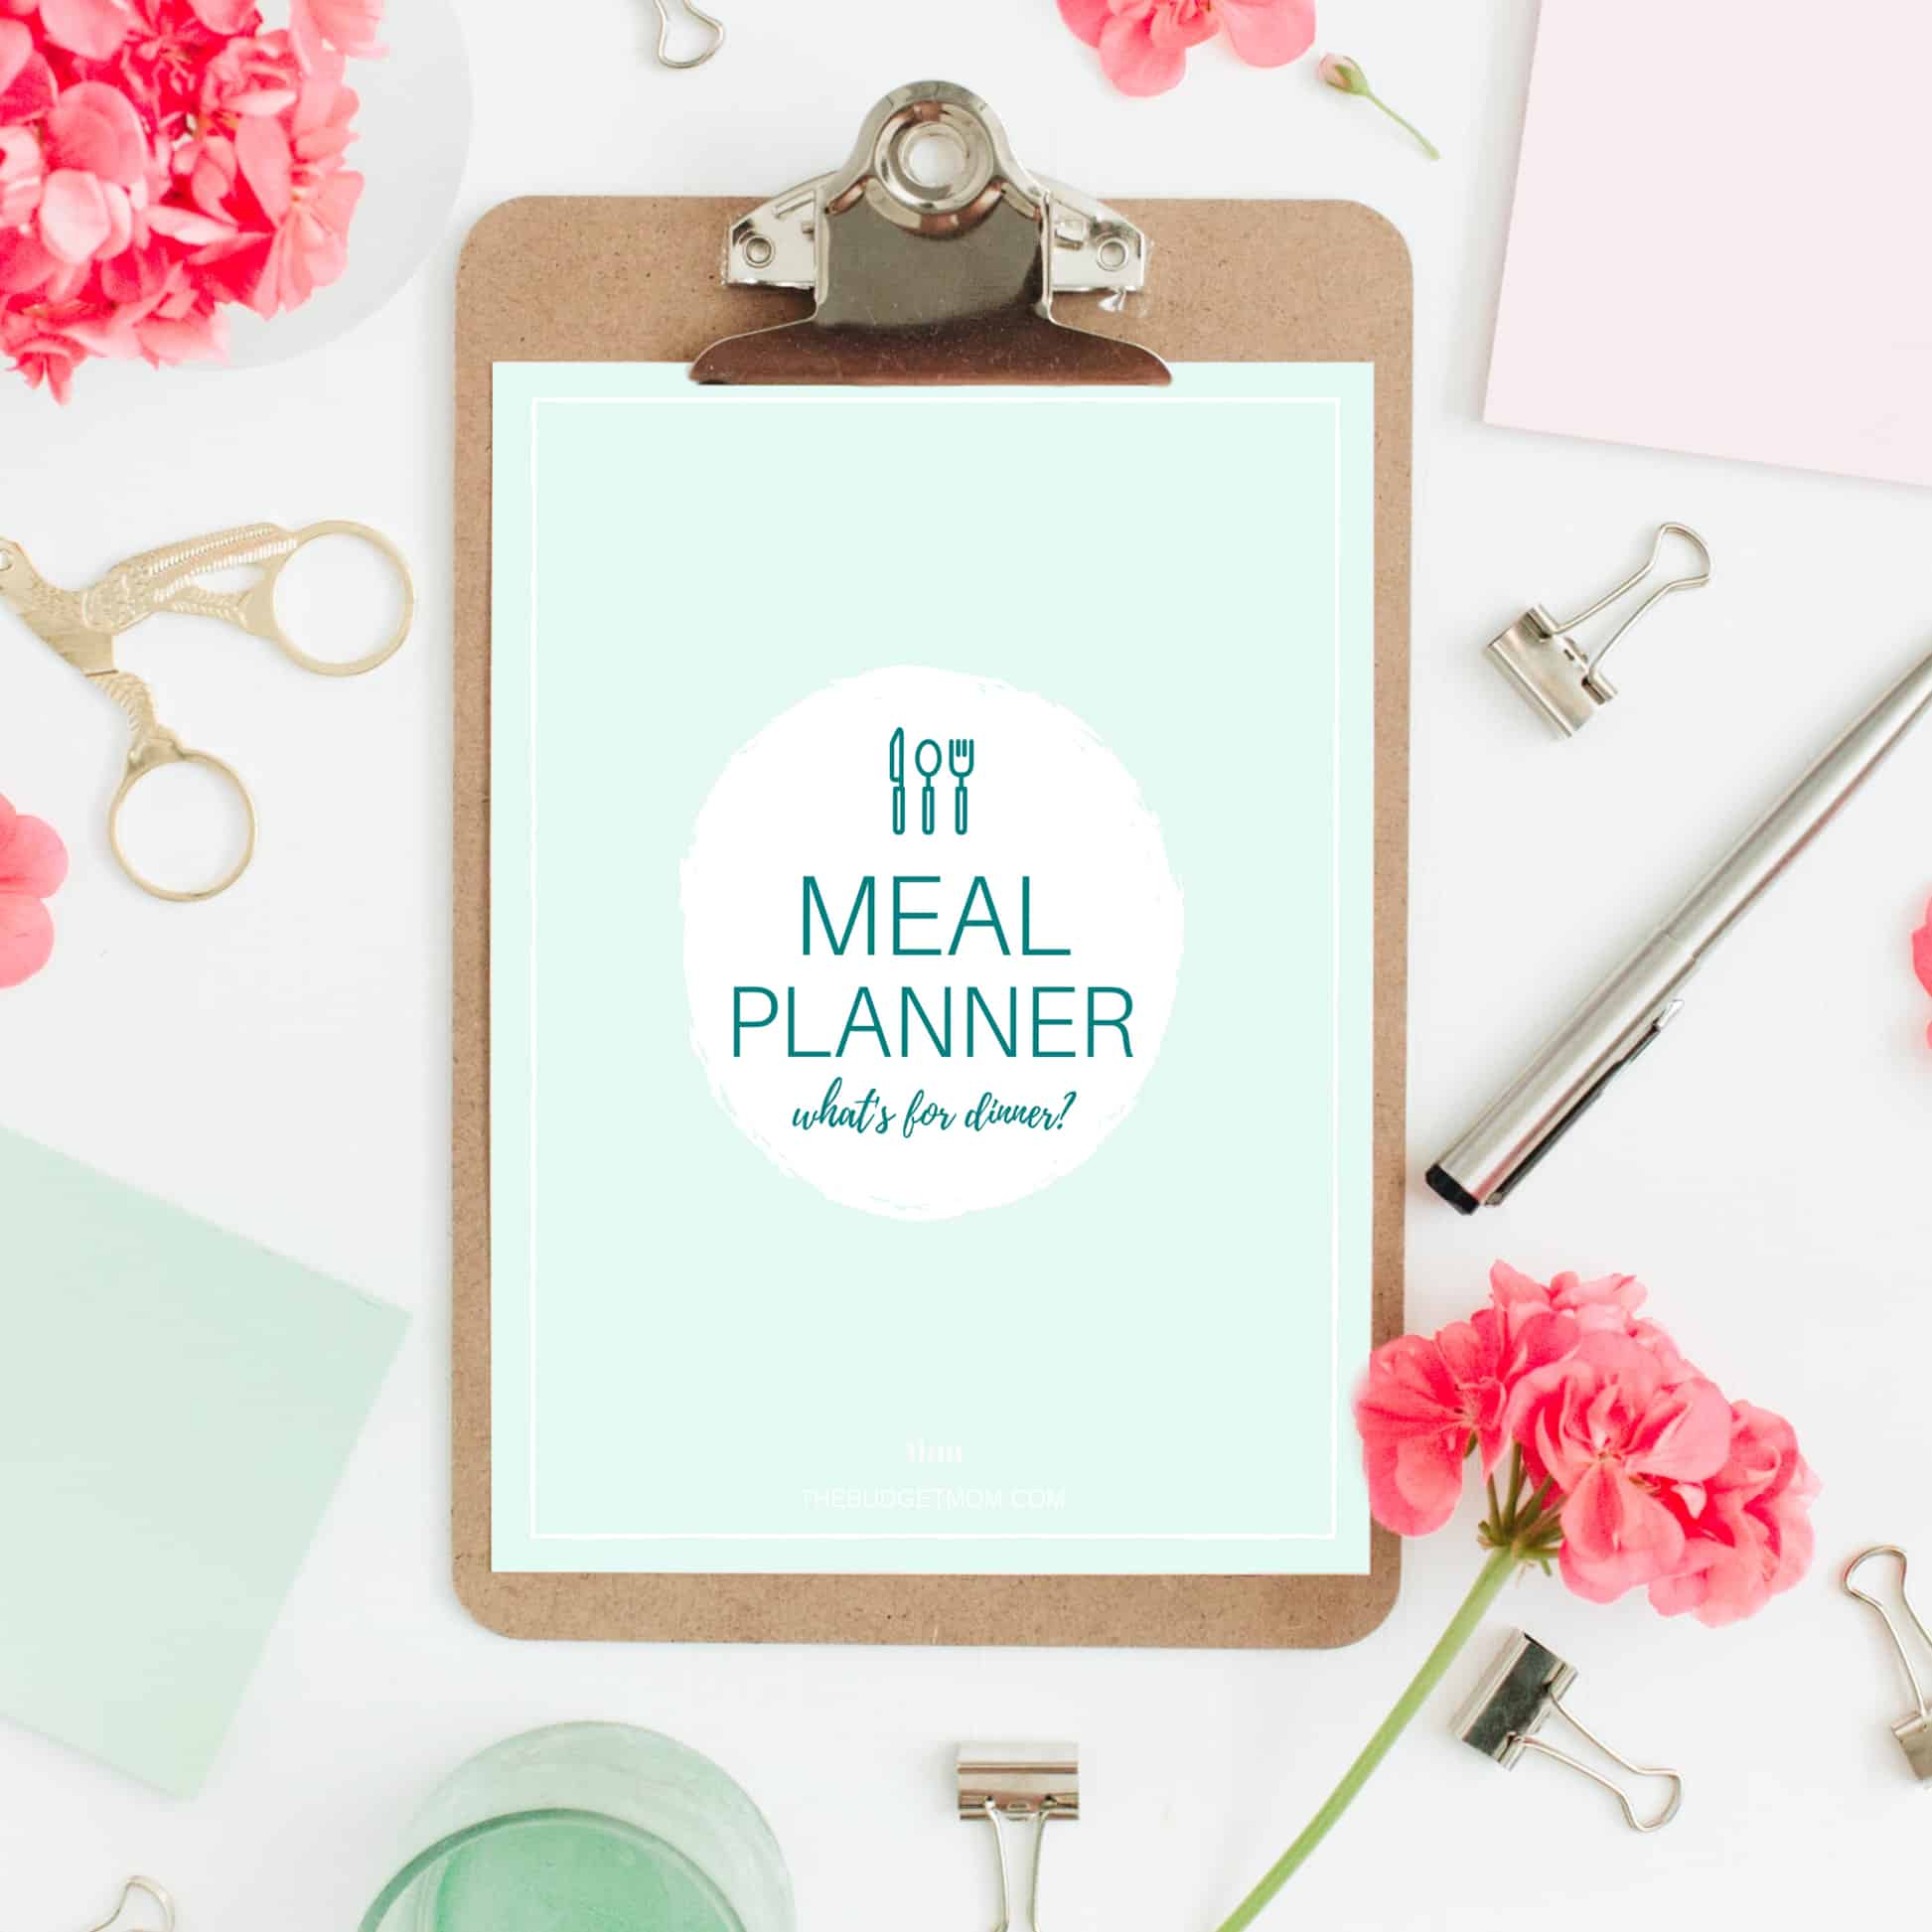 B.Box Lunch Box Bento Meal Planner Template - Weekly Daily Meal Plan –  BZMOMMY